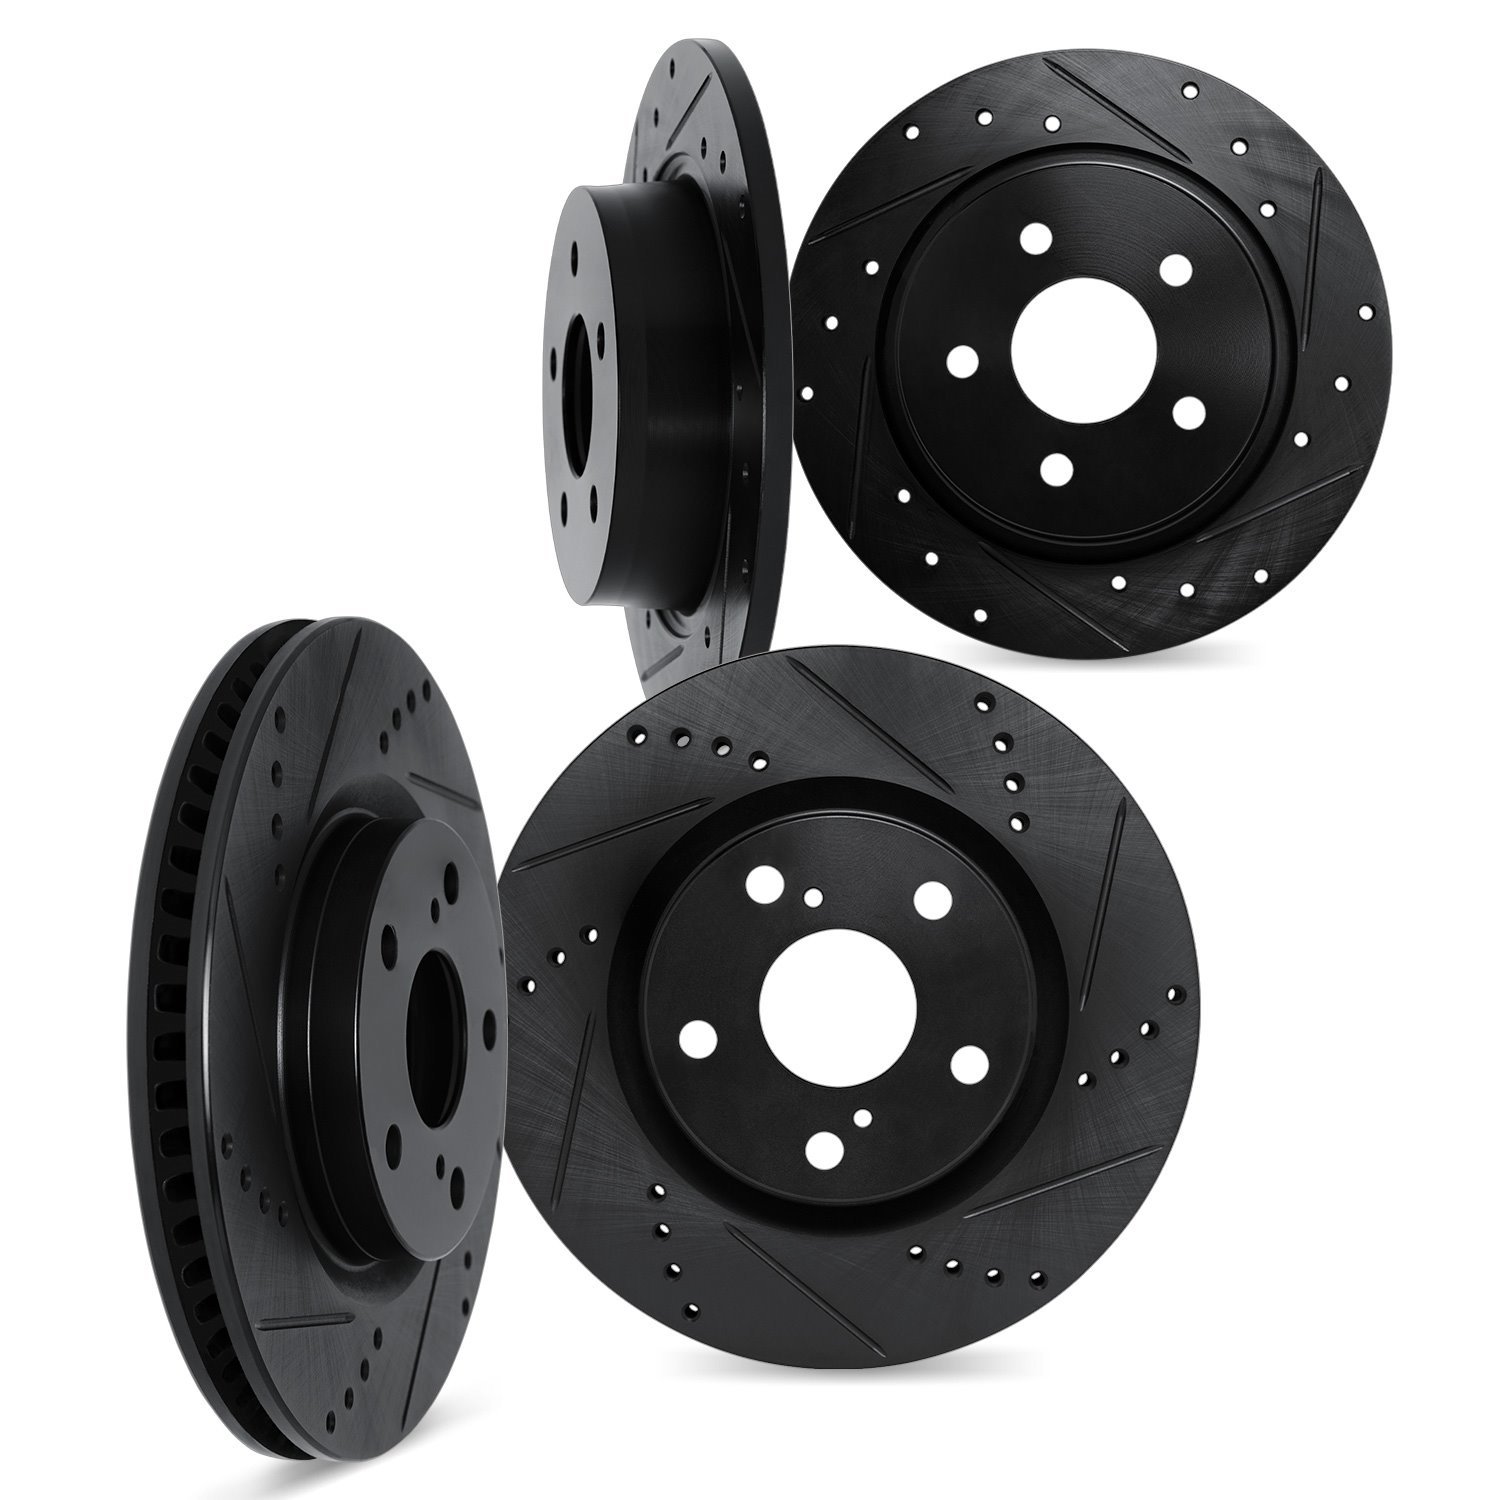 8004-59019 Drilled/Slotted Brake Rotors [Black], 2006-2014 Acura/Honda, Position: Front and Rear